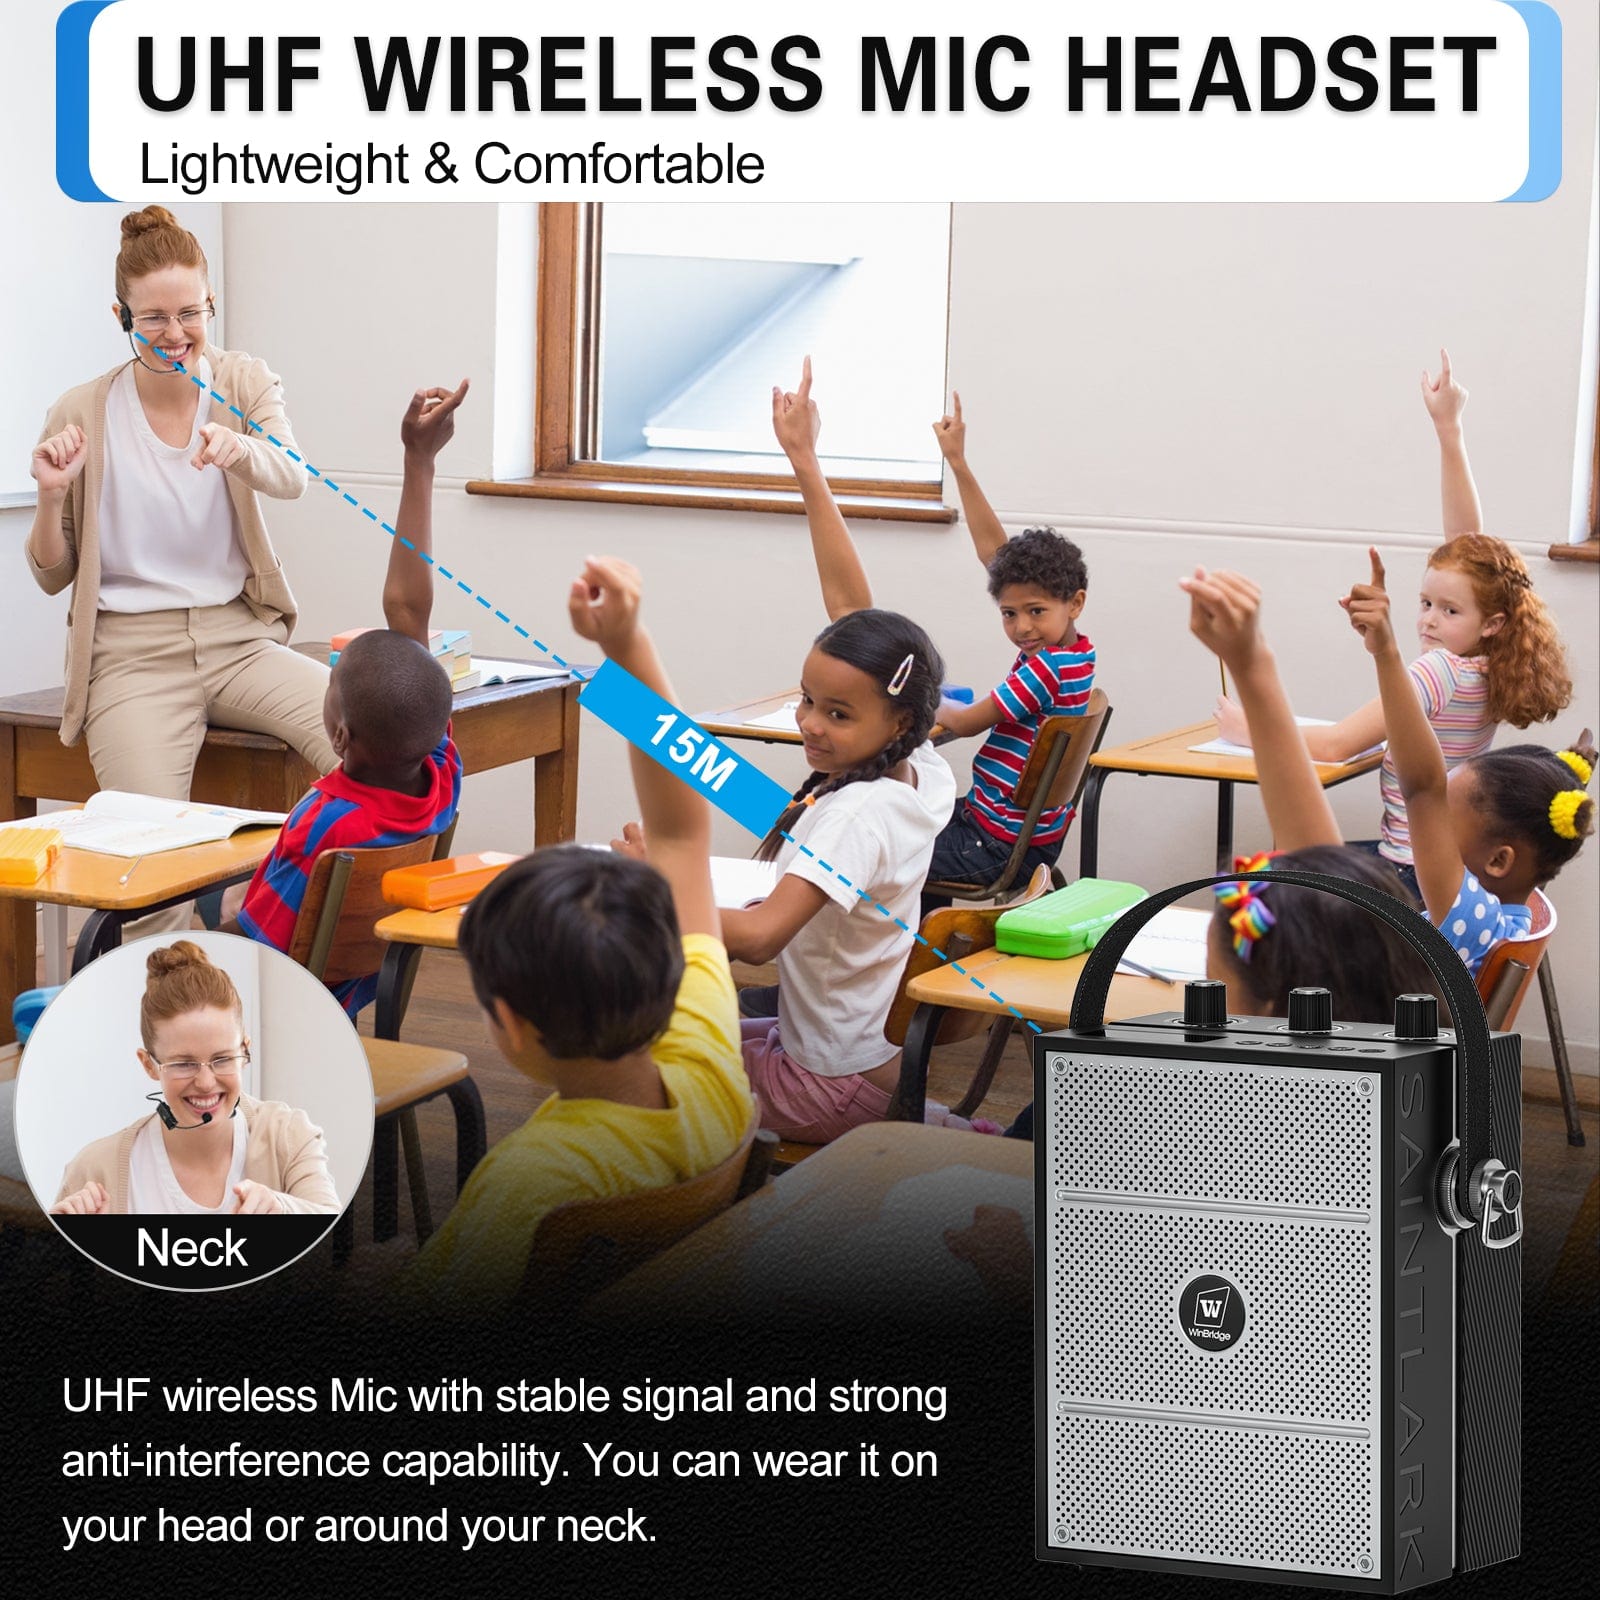 WinBridge S98 40W Wireless Voice Amplifier Portable Bluetooth 5.3 PA System with UHF Wireless Mic Headset, Echo, Easy Volume Control, Megaphone Speaker and Microphone Set for Teachers, Indoor/Outdoor Events